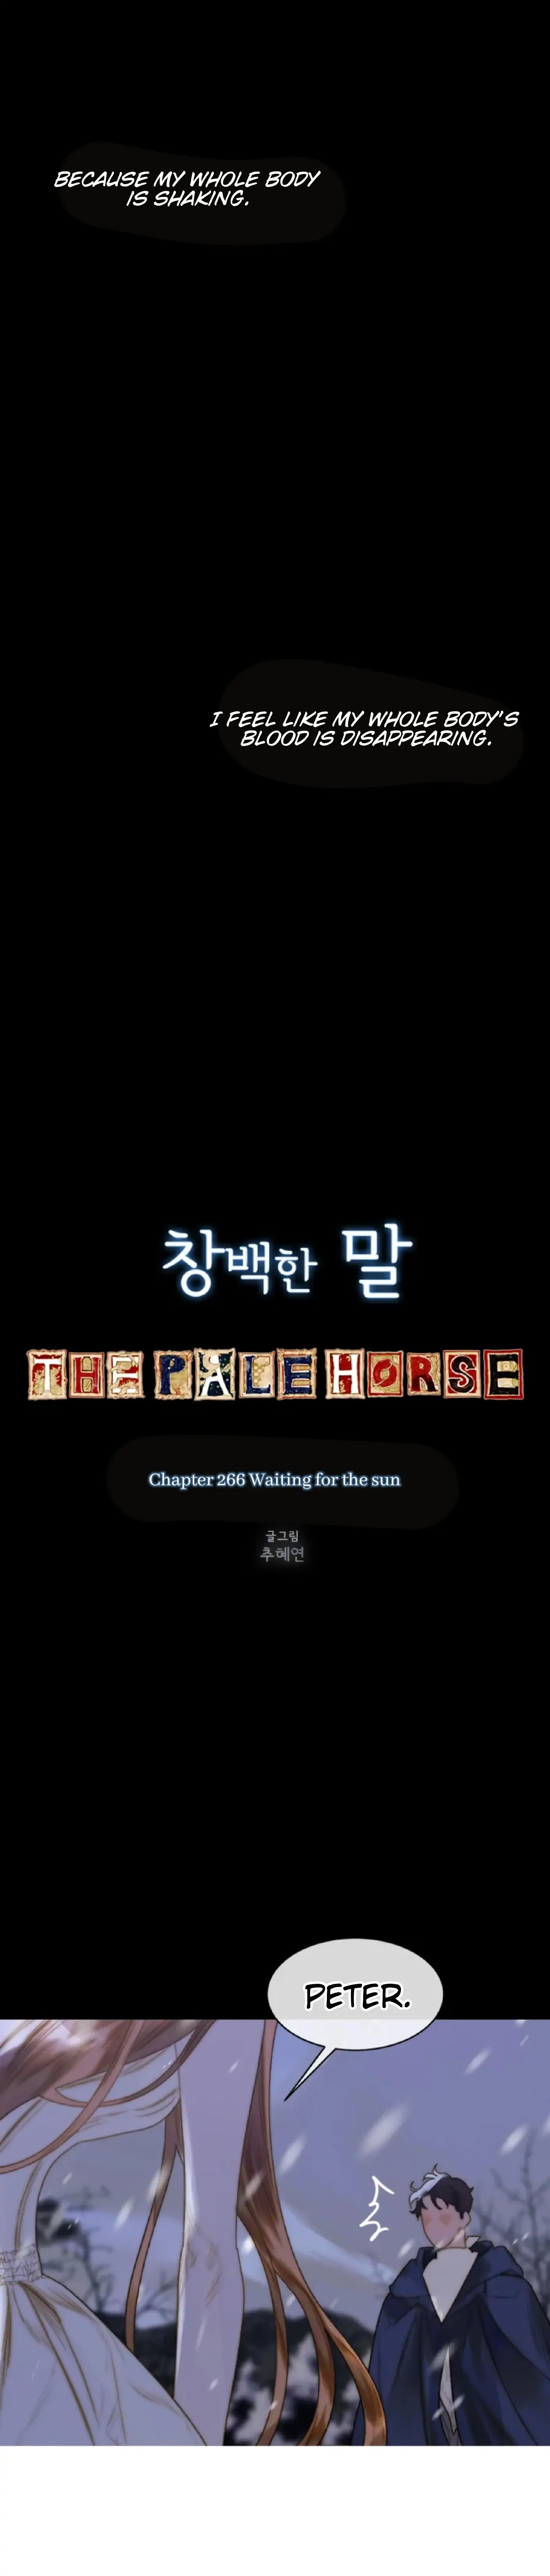 The Pale Horse - episode 292 - 1